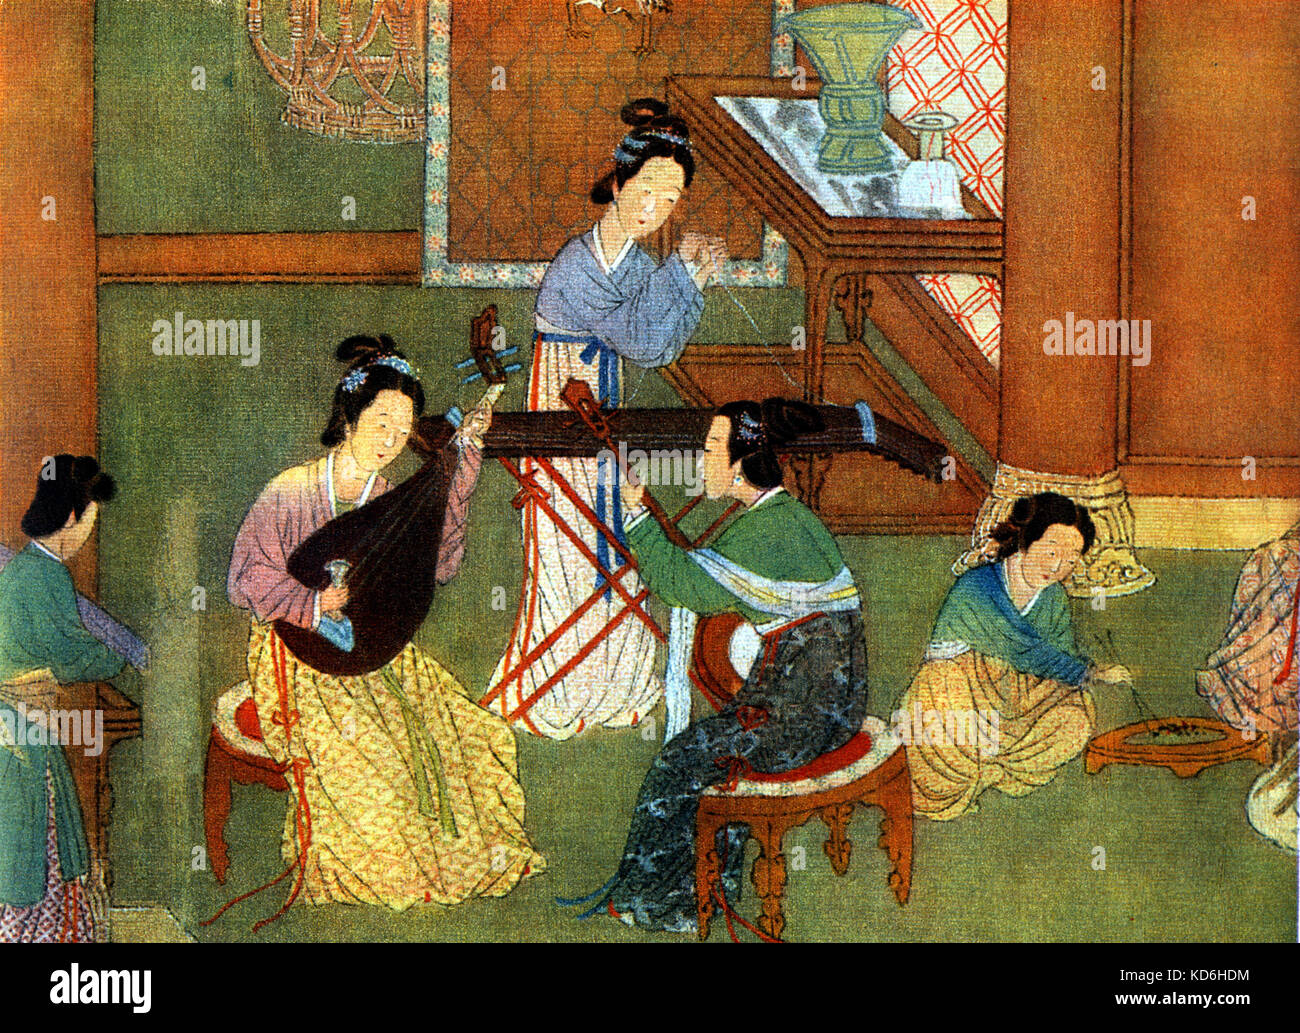 Chinese music ensemble from left to right: Pipa (lute) player, Gu Qin  (zither) player, Yueh Qin (moon guitar) player Stock Photo - Alamy